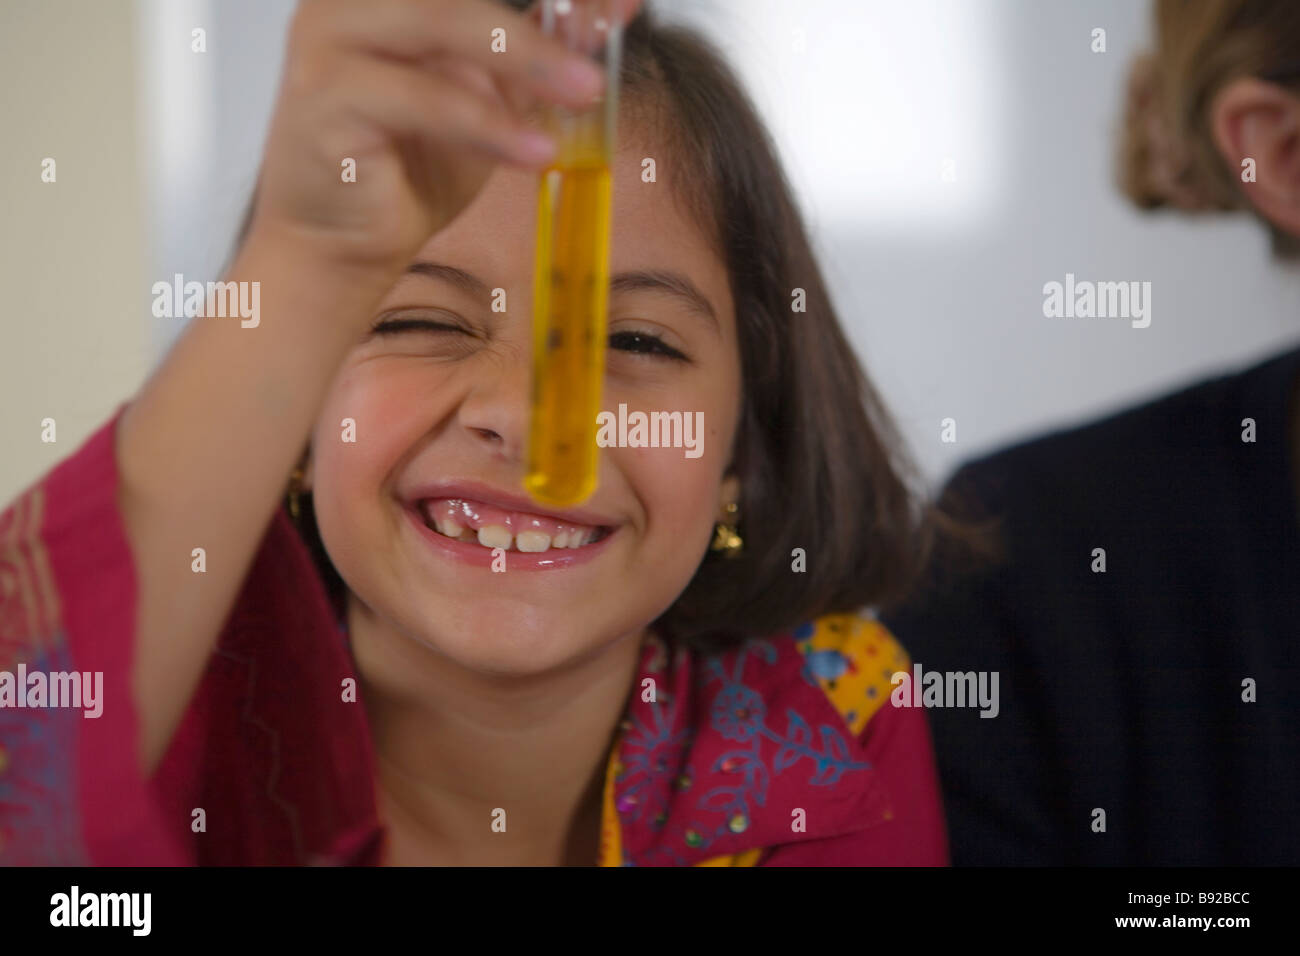 Young girl looking at a test tube in a chemistry science class Dubai United Arab Emirates Stock Photo